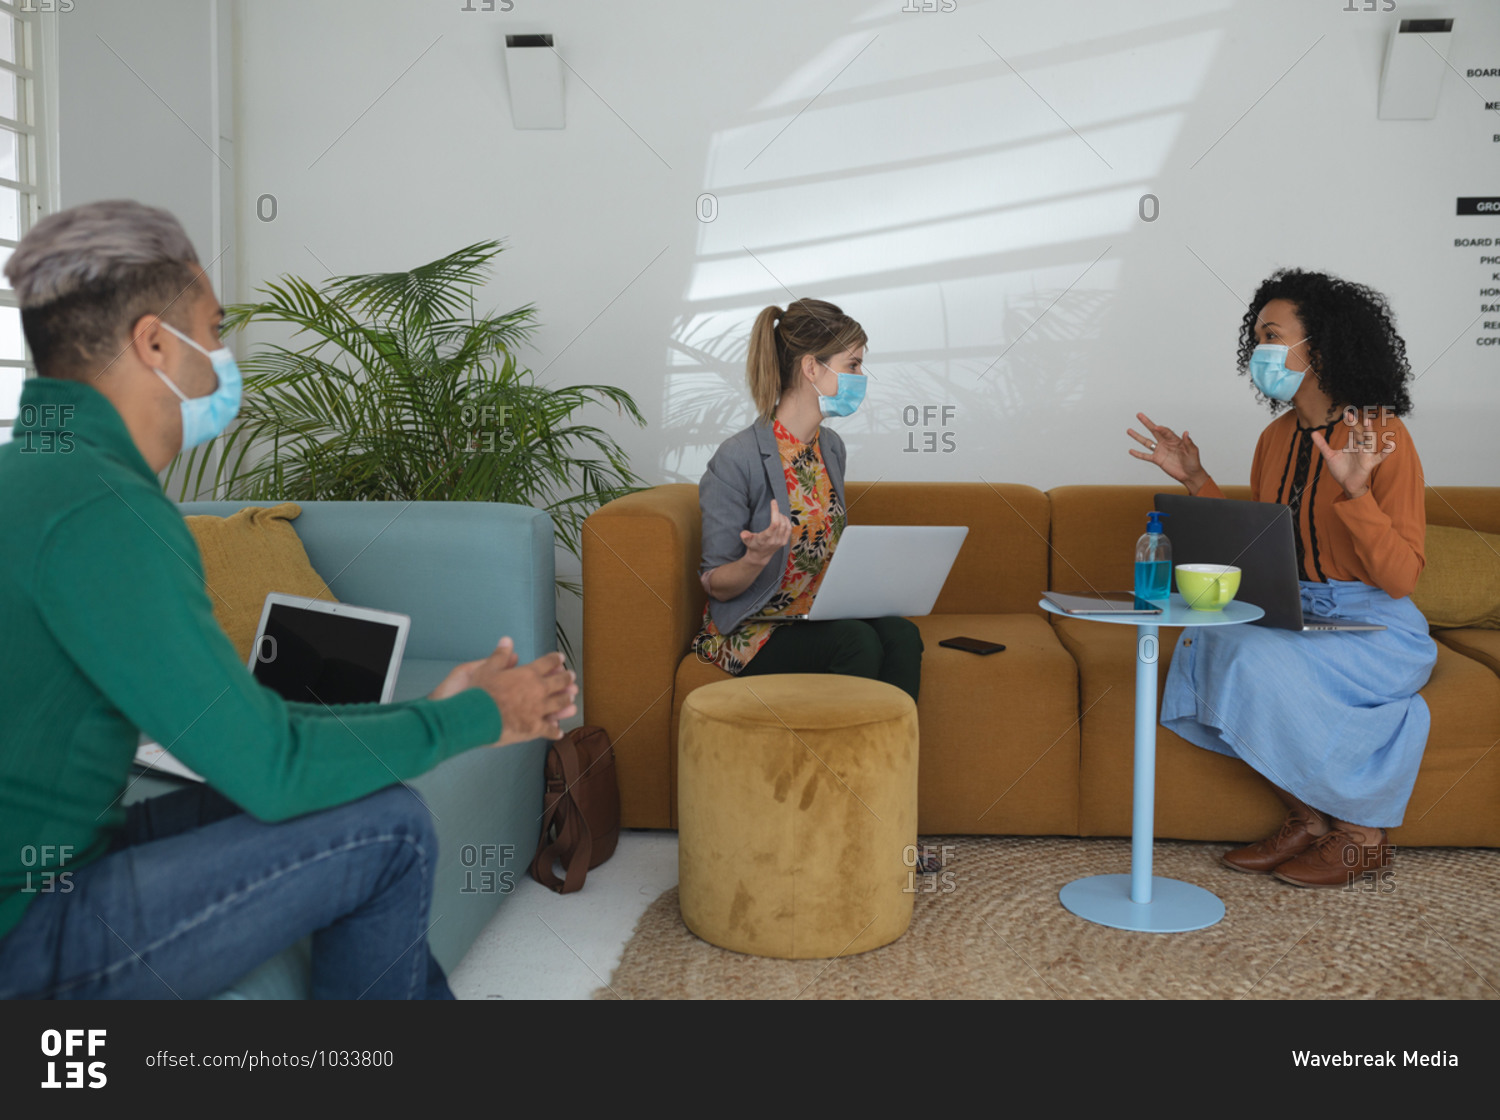 Multi ethnic group of male and female creatives wearing face masks and social distancing at a work meeting. Health and hygiene in the workplace during Coronavirus Covid 19 pandemic.